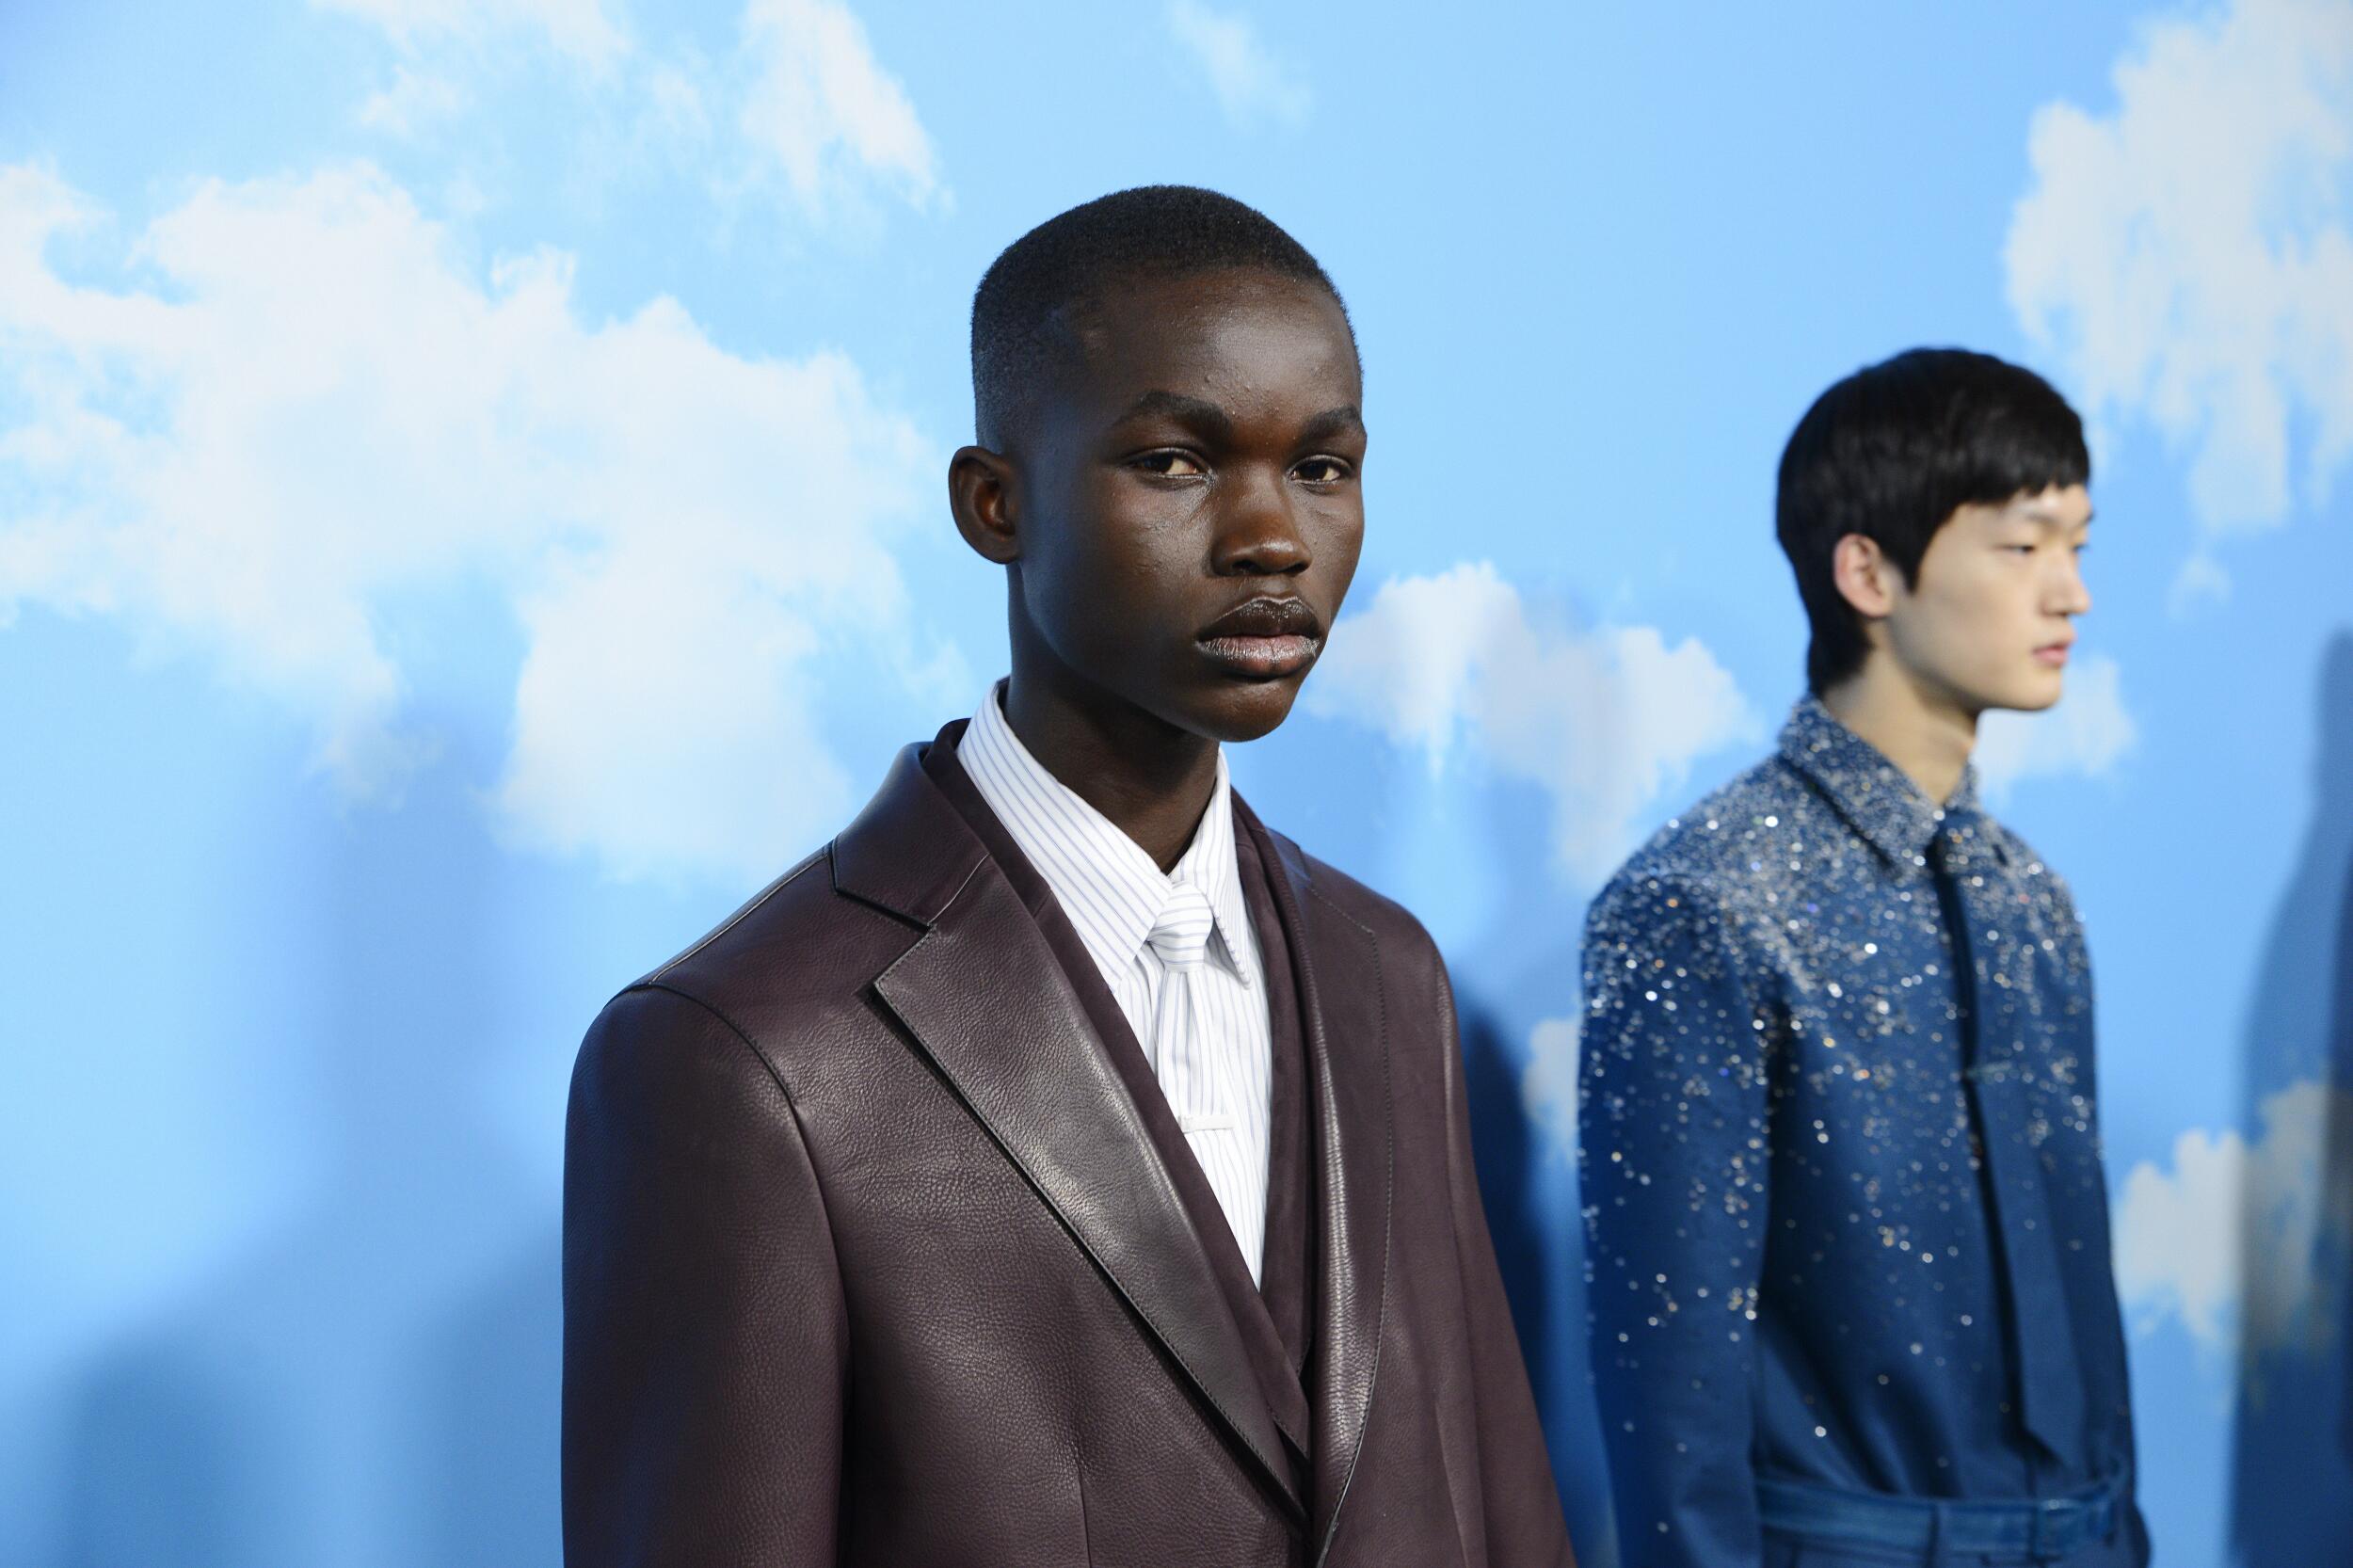 Louis Vuitton - Scenes from backstage at the Louis Vuitton Men's